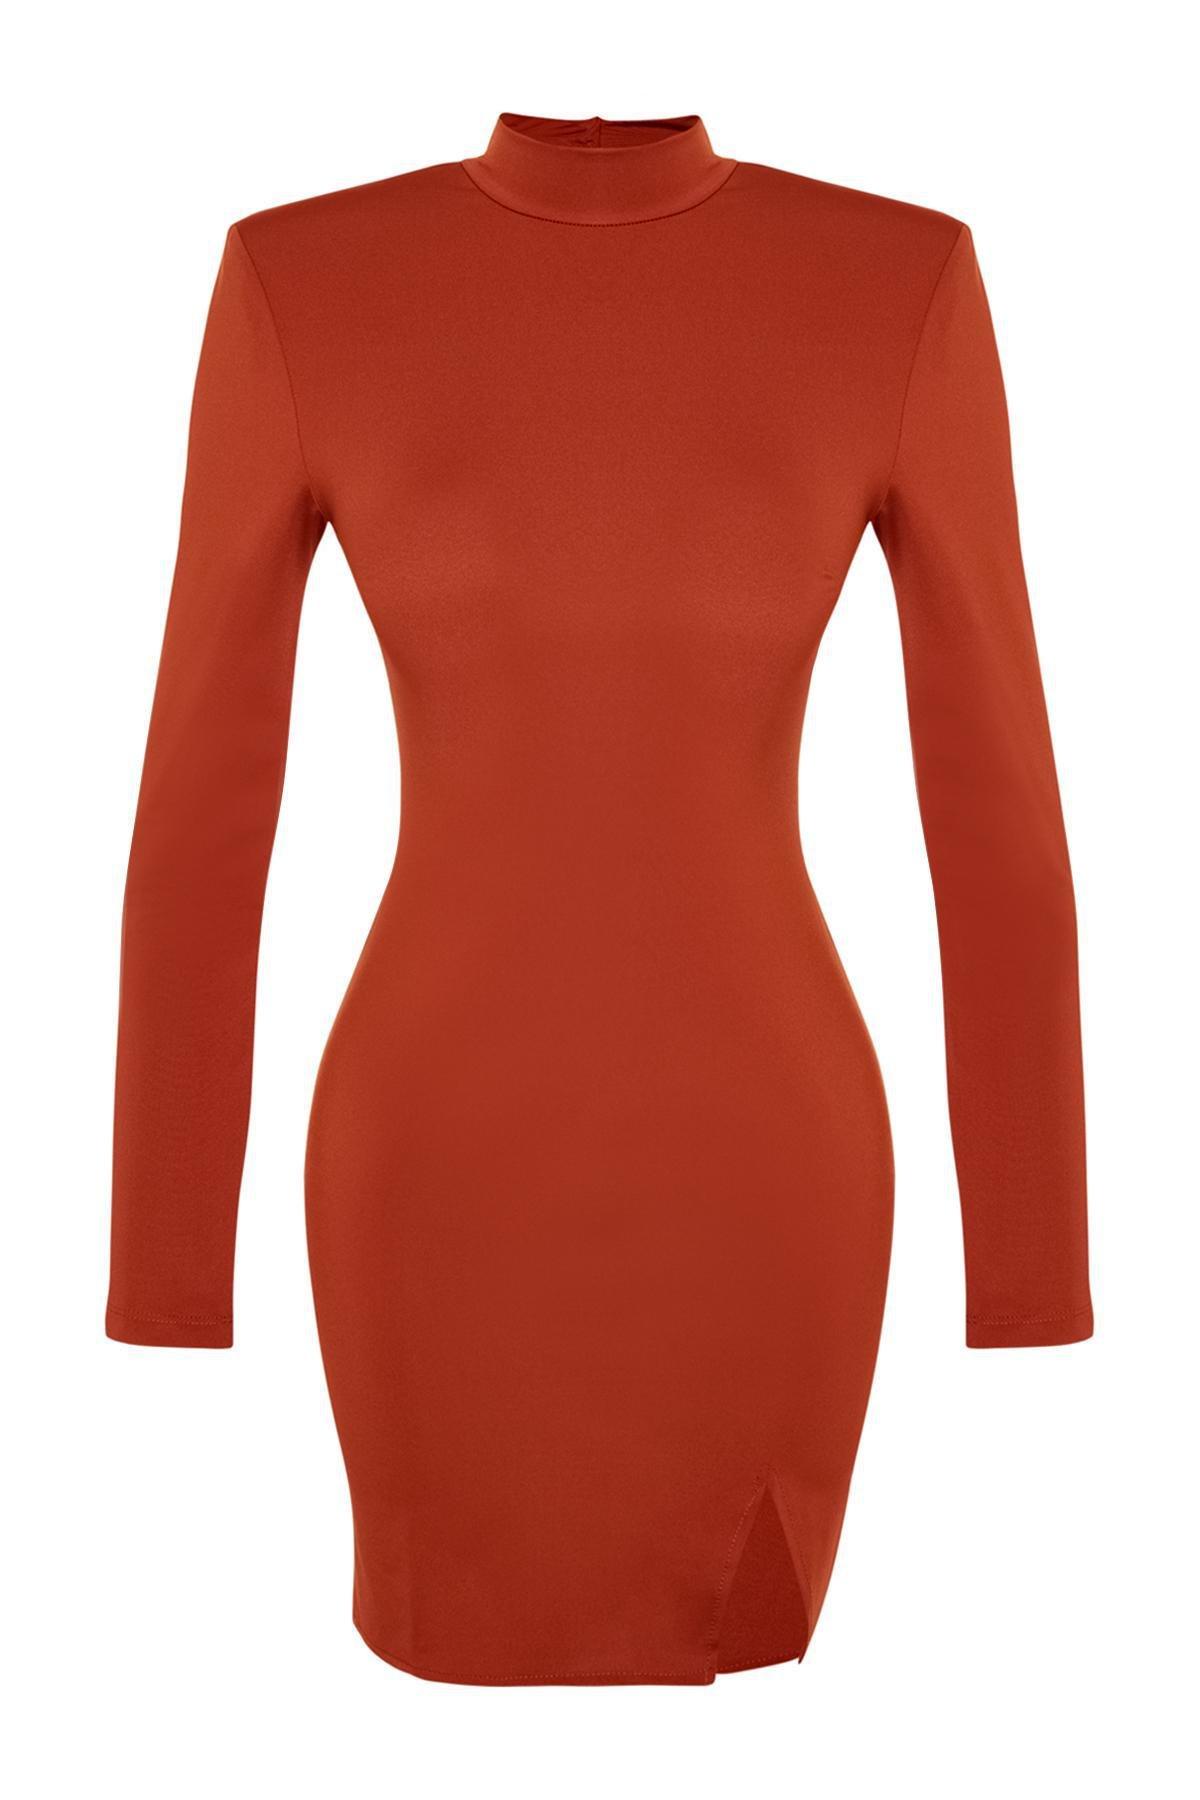 Trendyol - Brown Fitted Collared Occasion Wear Dress